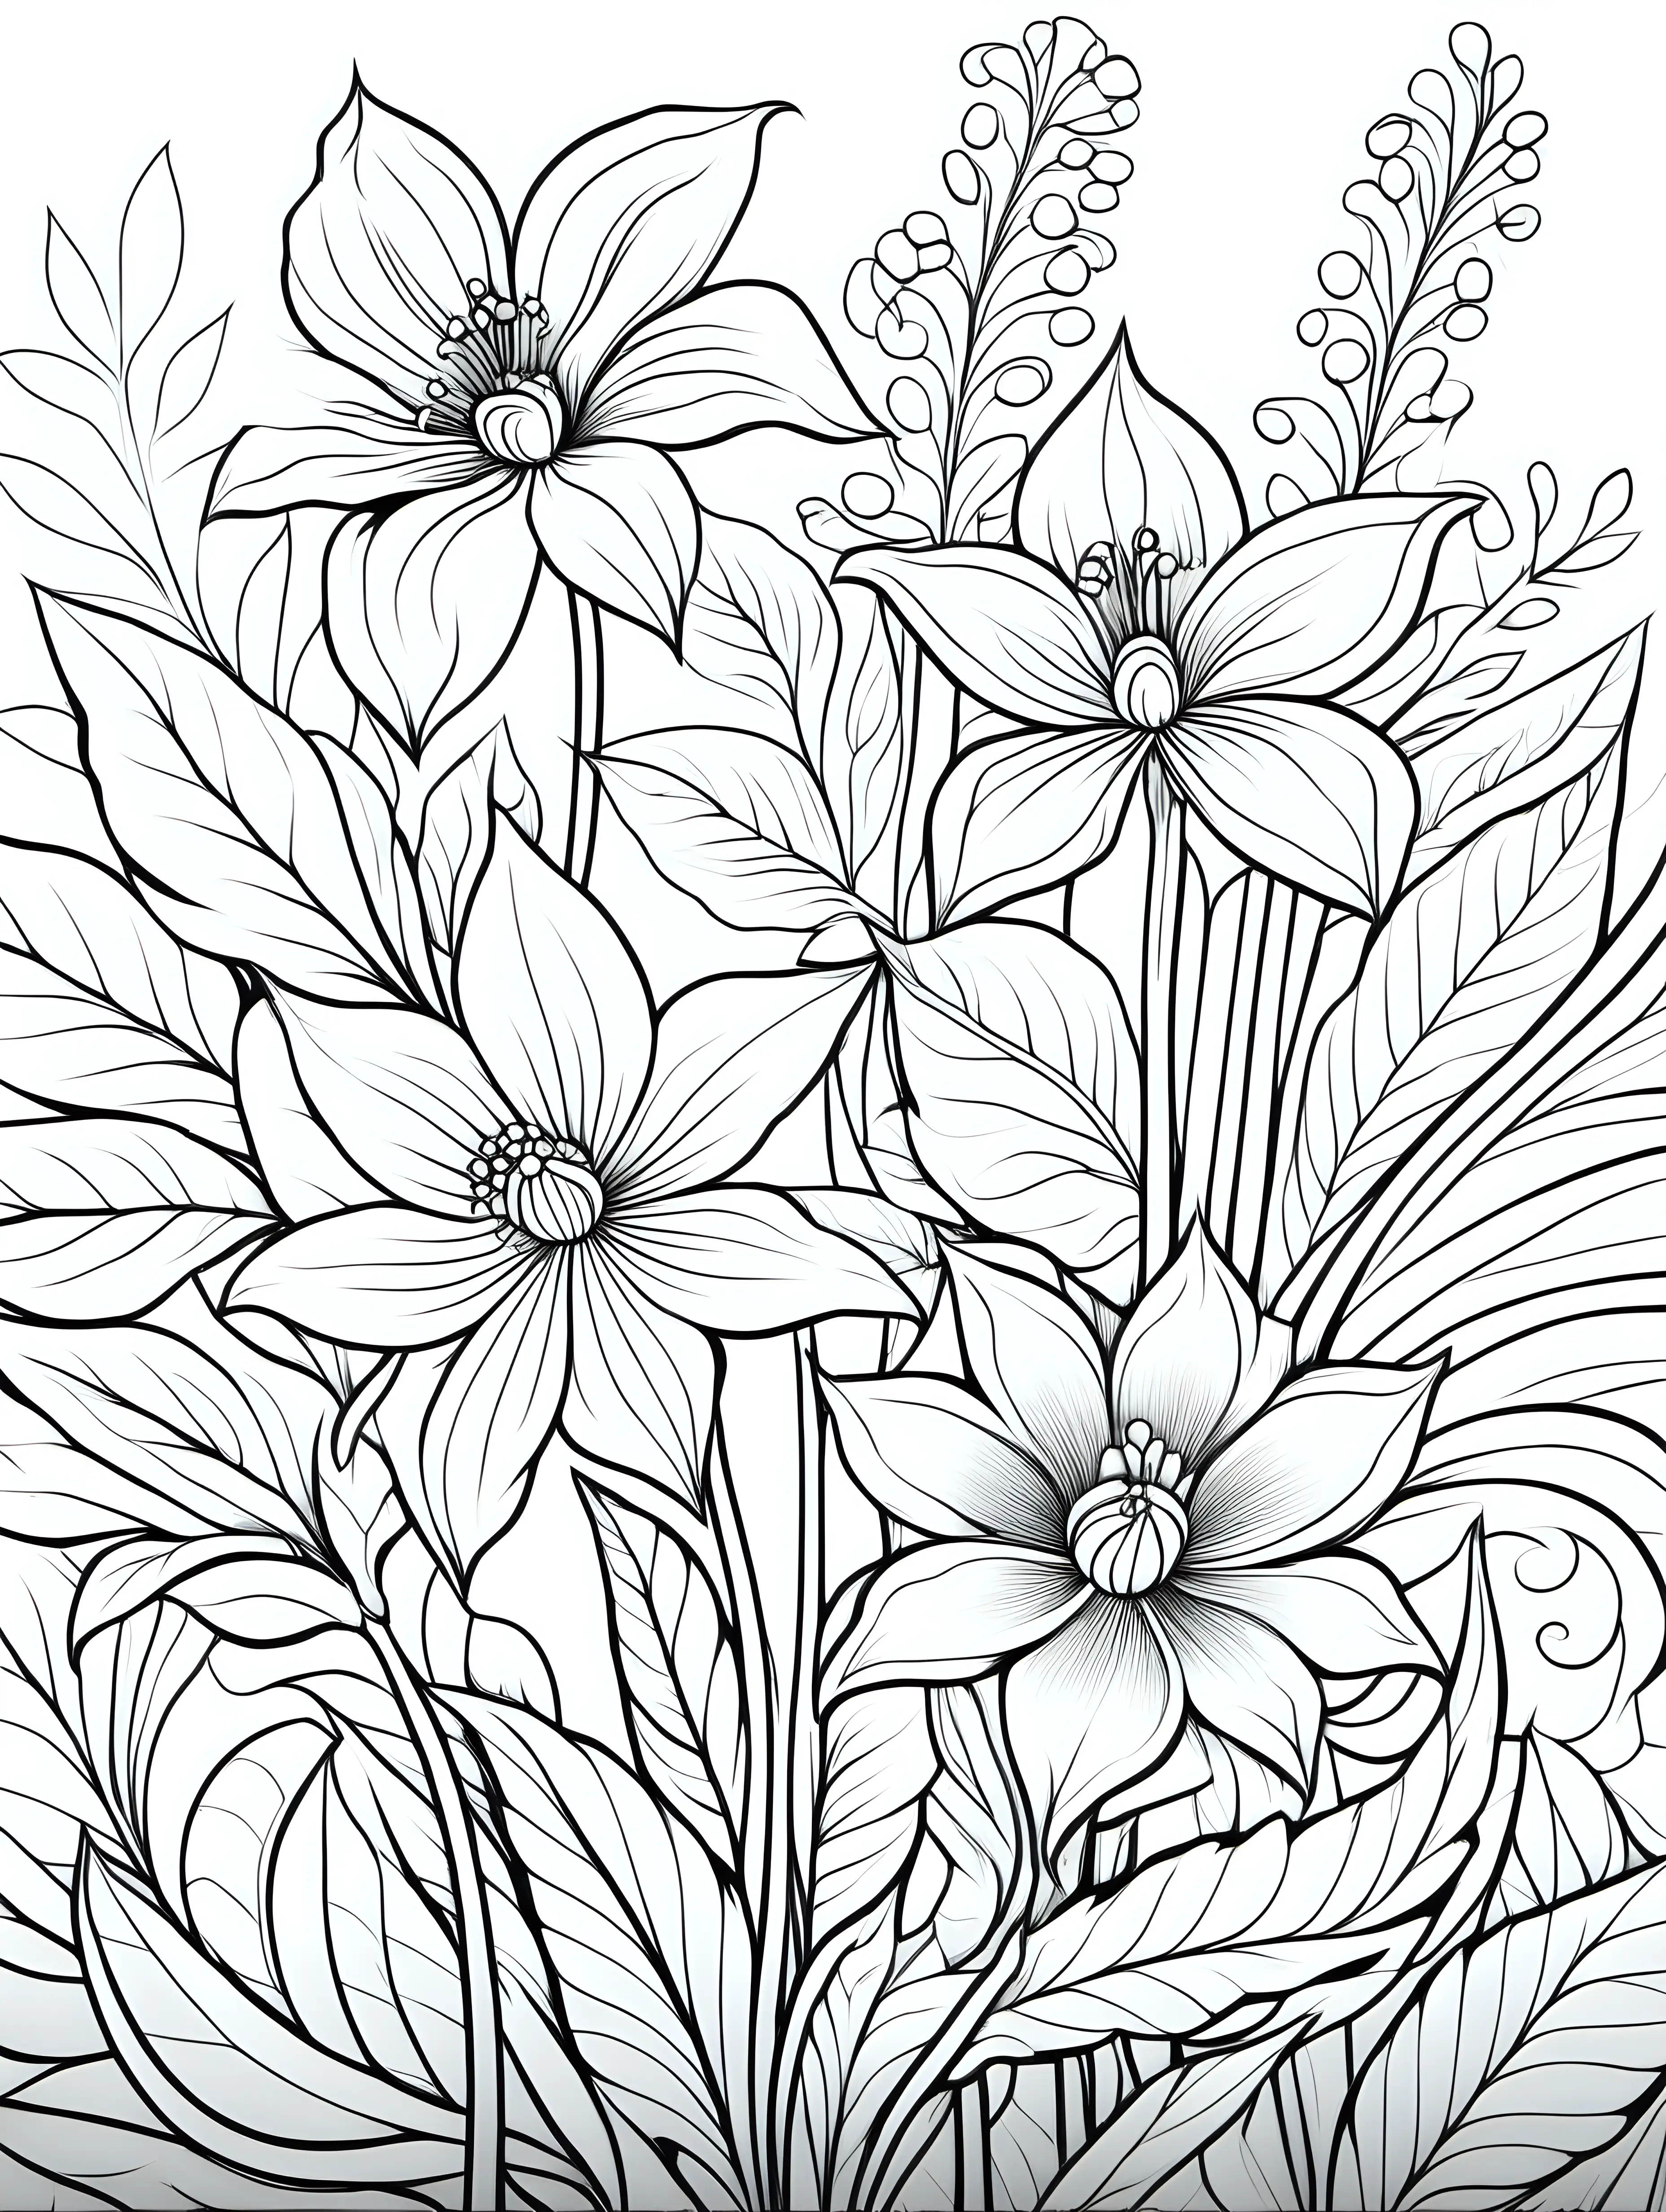 Floral Coloring Page with Clean Line Art on White Background